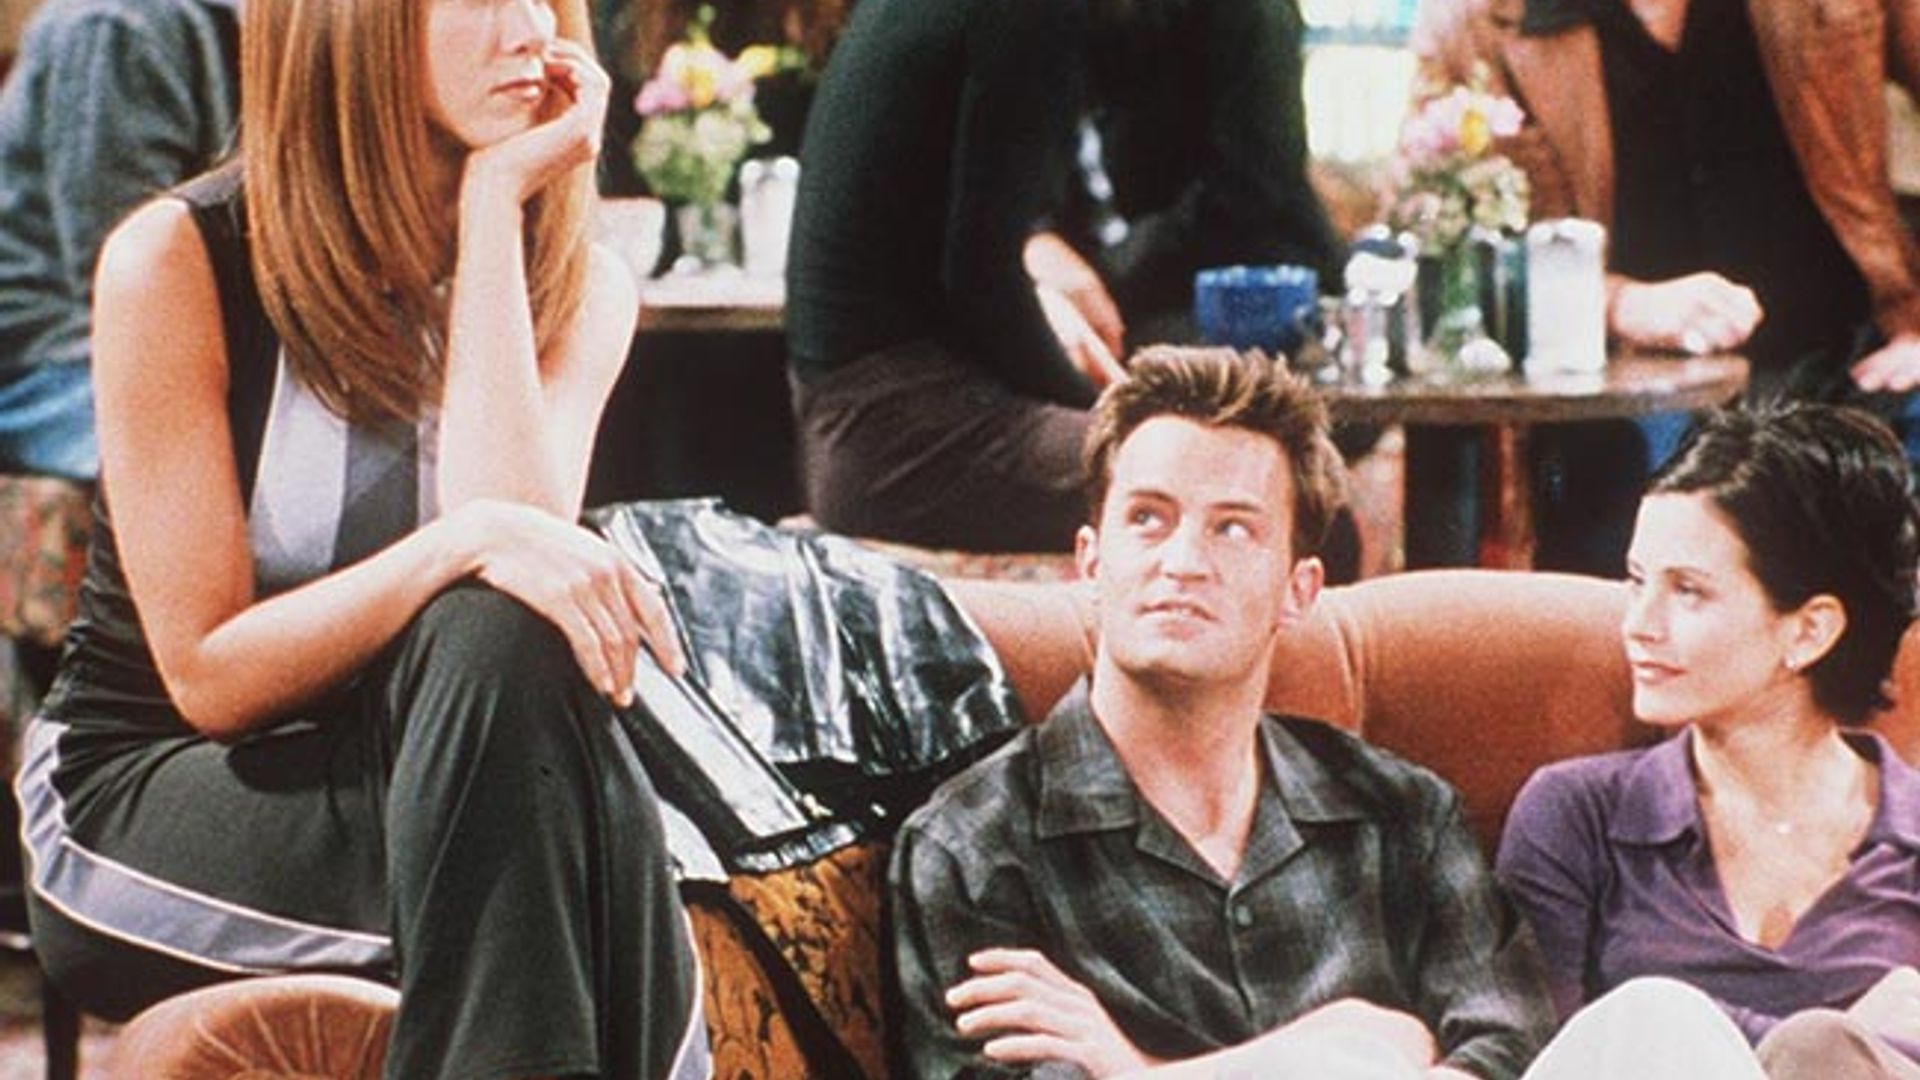 Things Friends Fans Never Noticed About Rachel Green